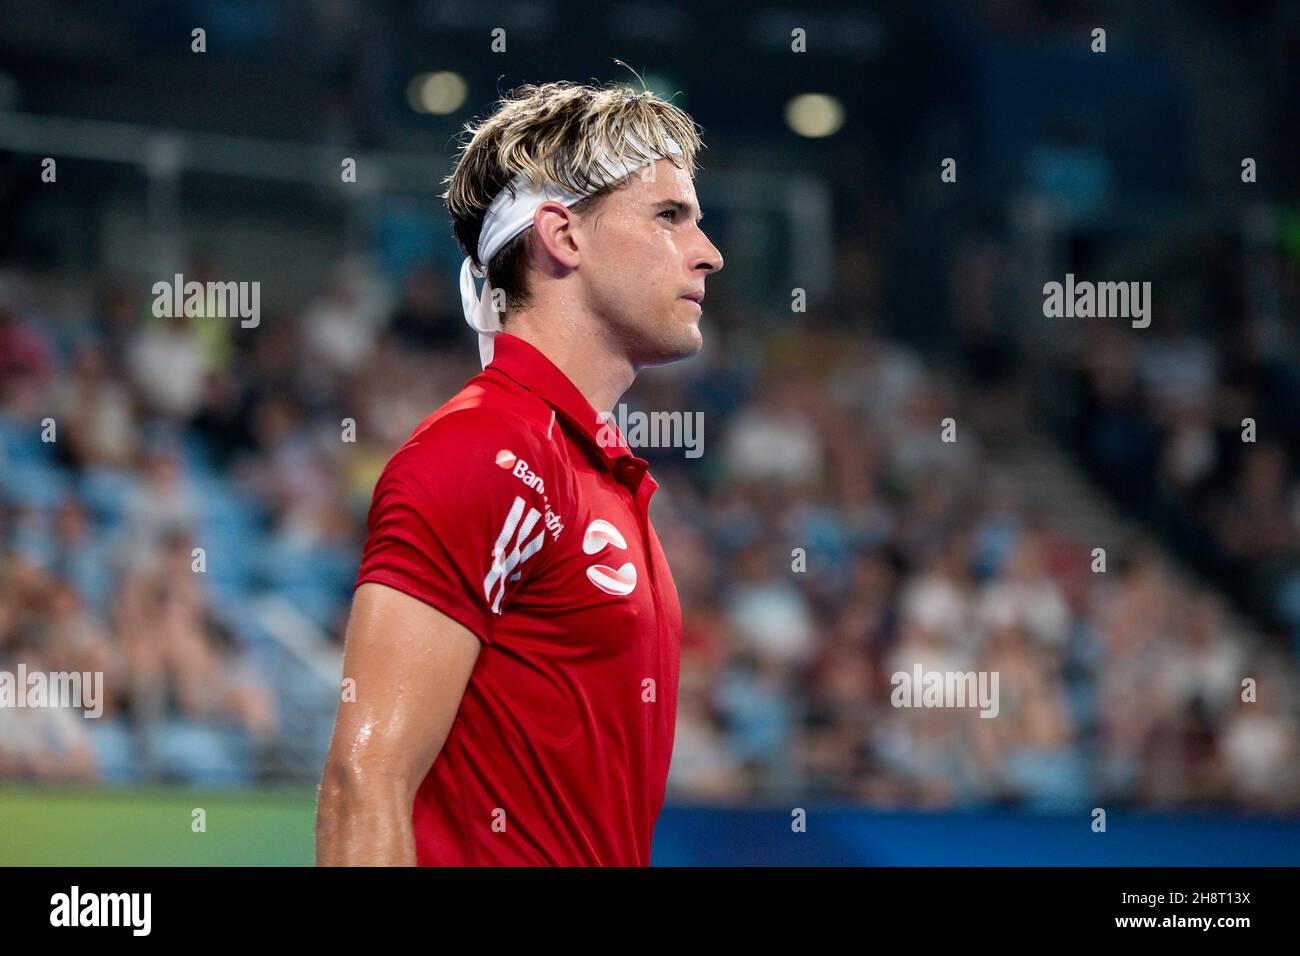 SYDNEY, AUSTRALIA - JANUARY 04: Dominic Thiem of Austria during day two of the Group singles match at the 2020 ATP Cup Tennis at Ken Rosewall Arena on January 04, 2020 in Sydney, Australia. Credit: Speed Media/Alamy Live News Stock Photo